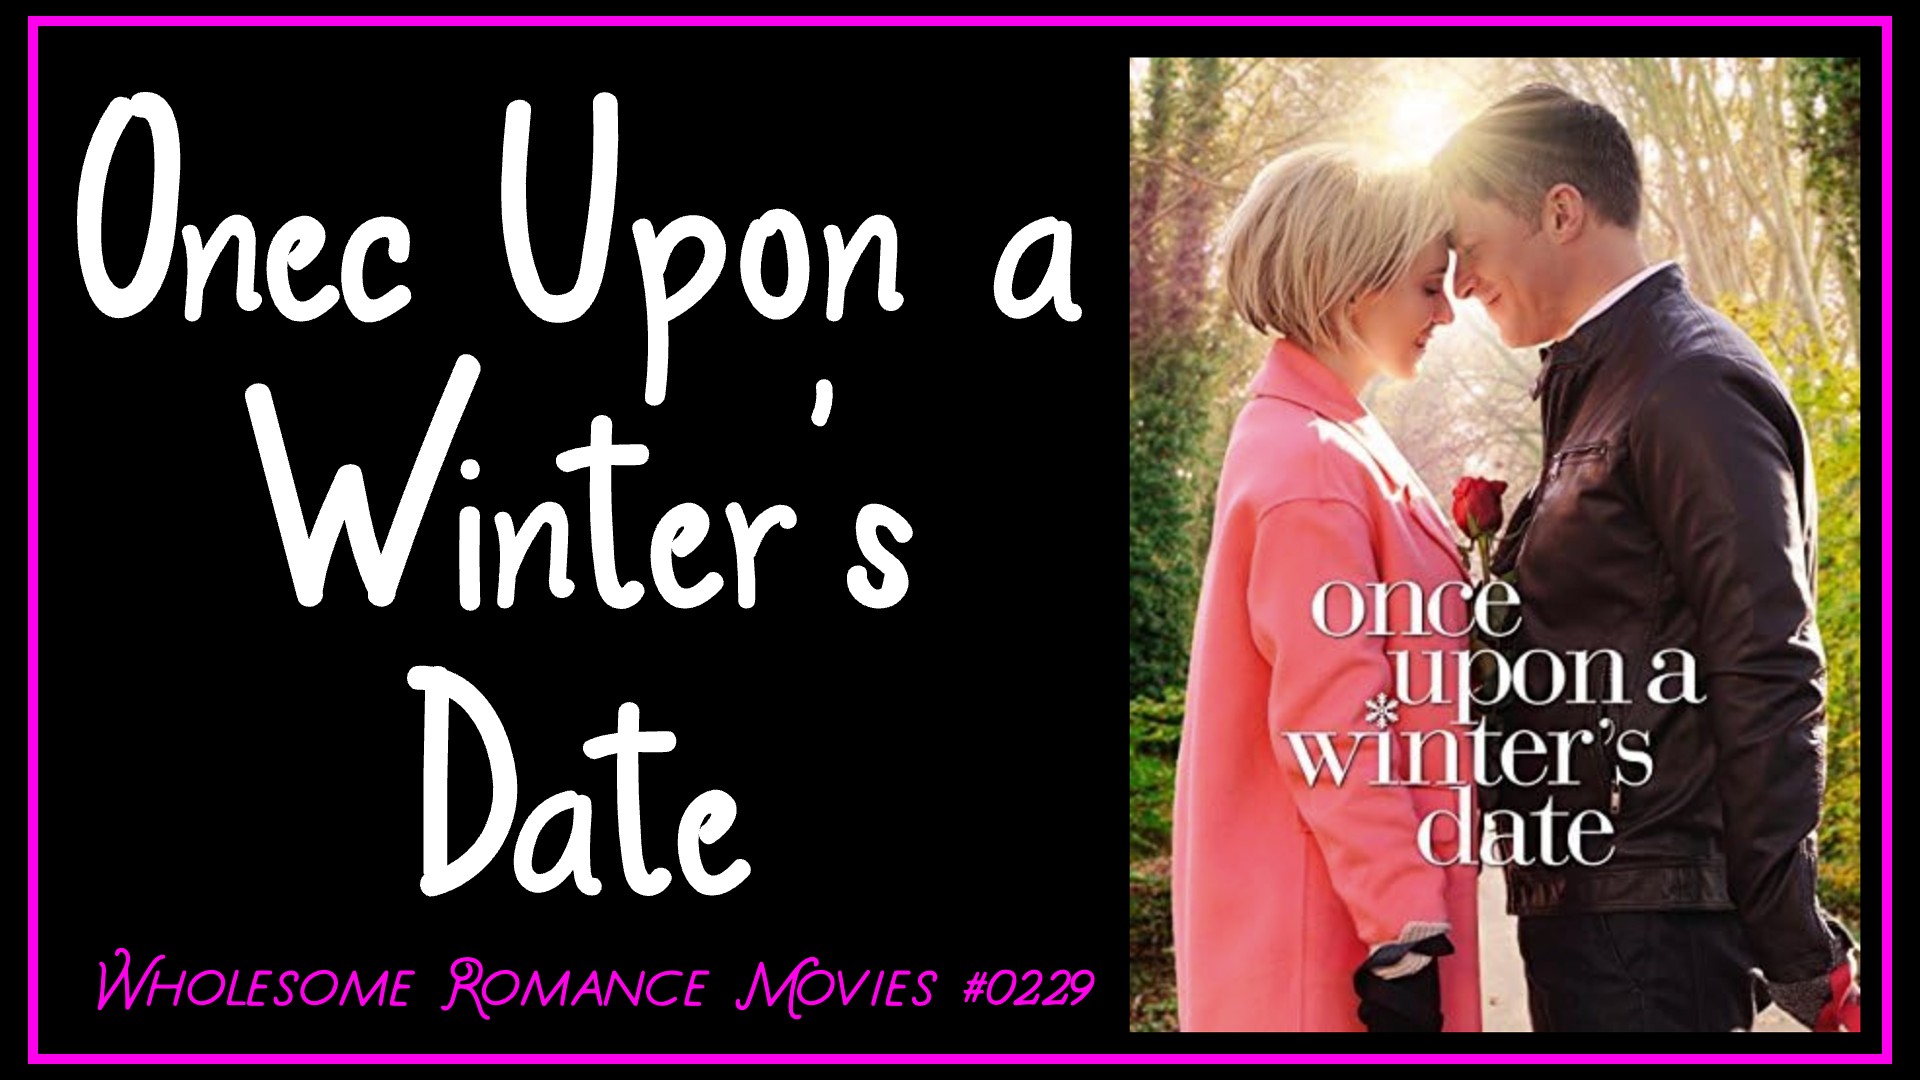 Once Upon a Winter’s Date (2018) WRM Review